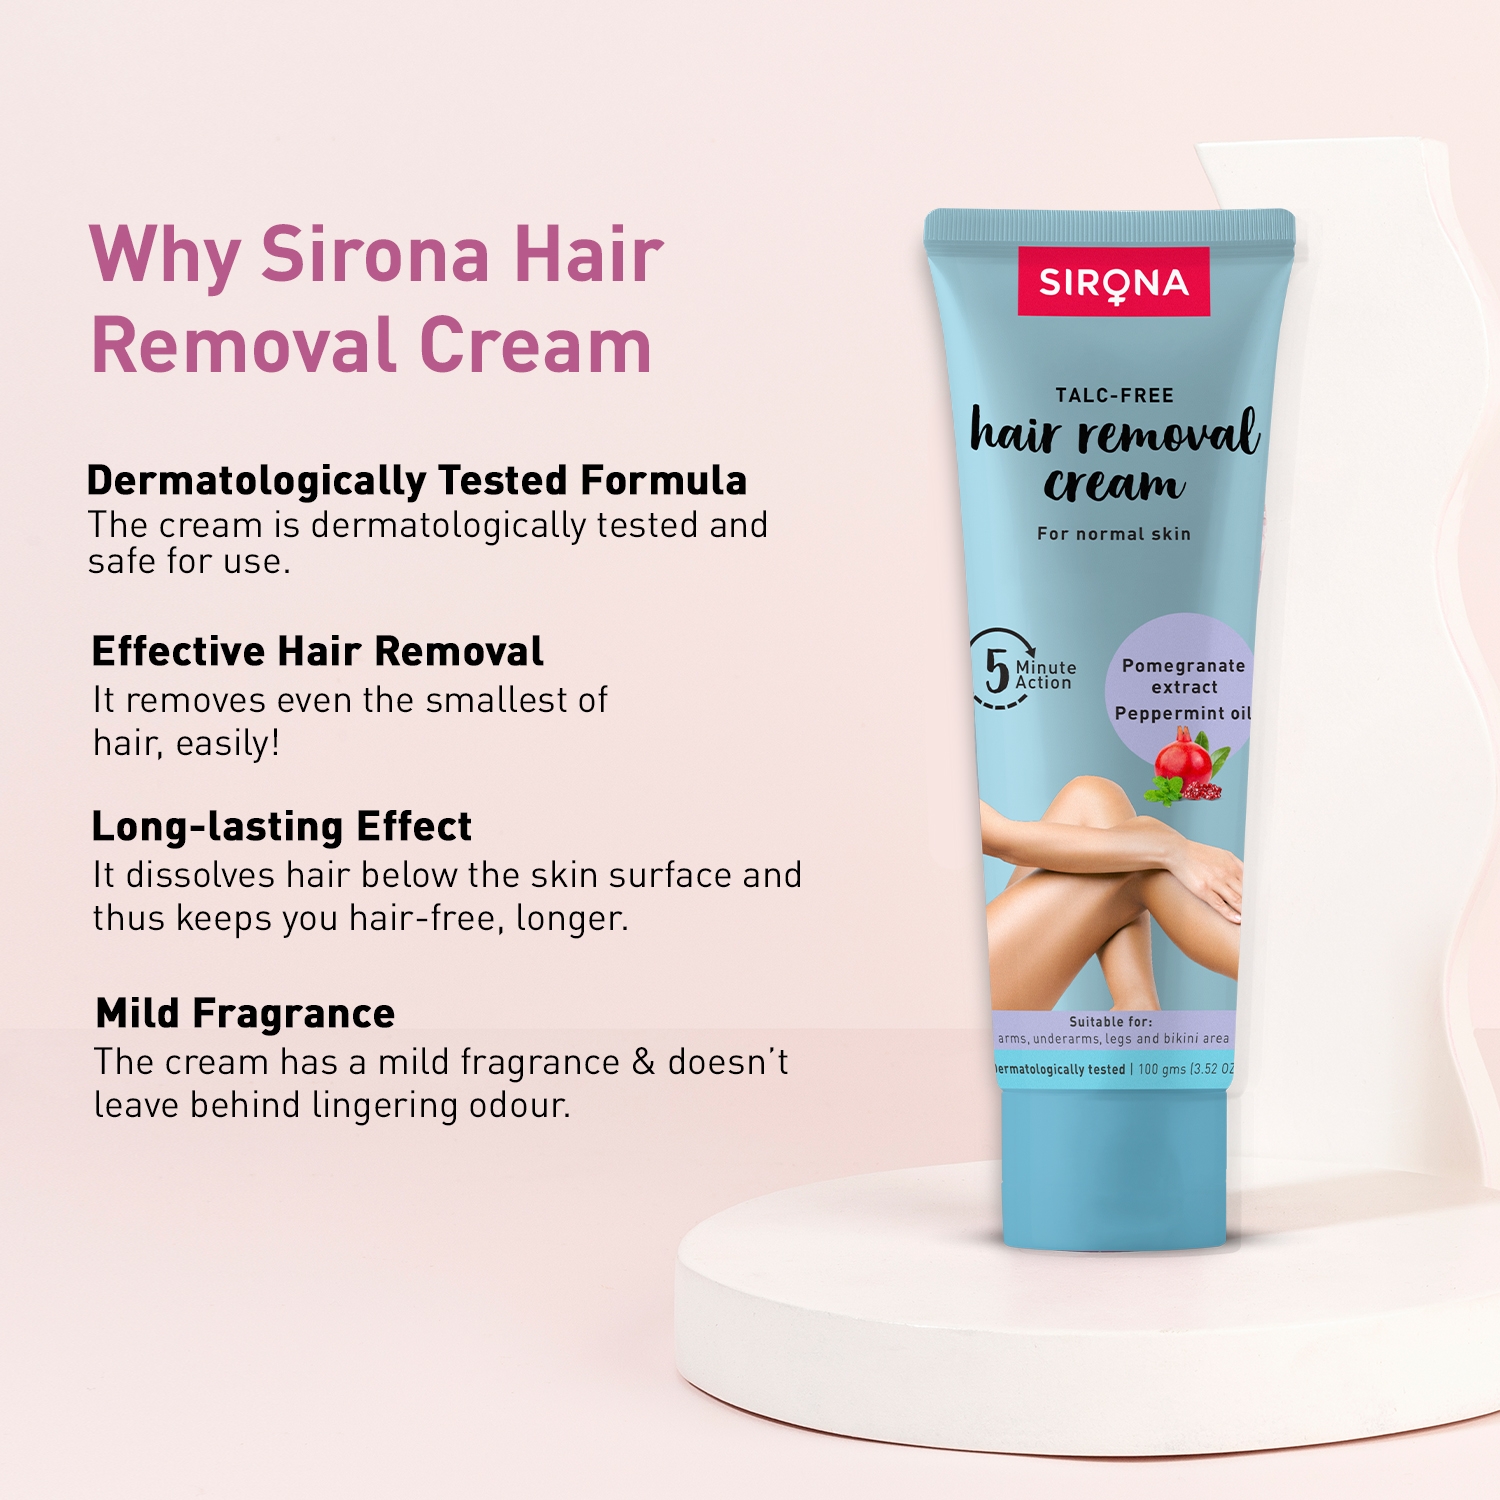 Sirona Hair Removal Cream - 100 Gms For Arms, Legs, Bikini Line & Underarm With No Talc & No Chemical Actives